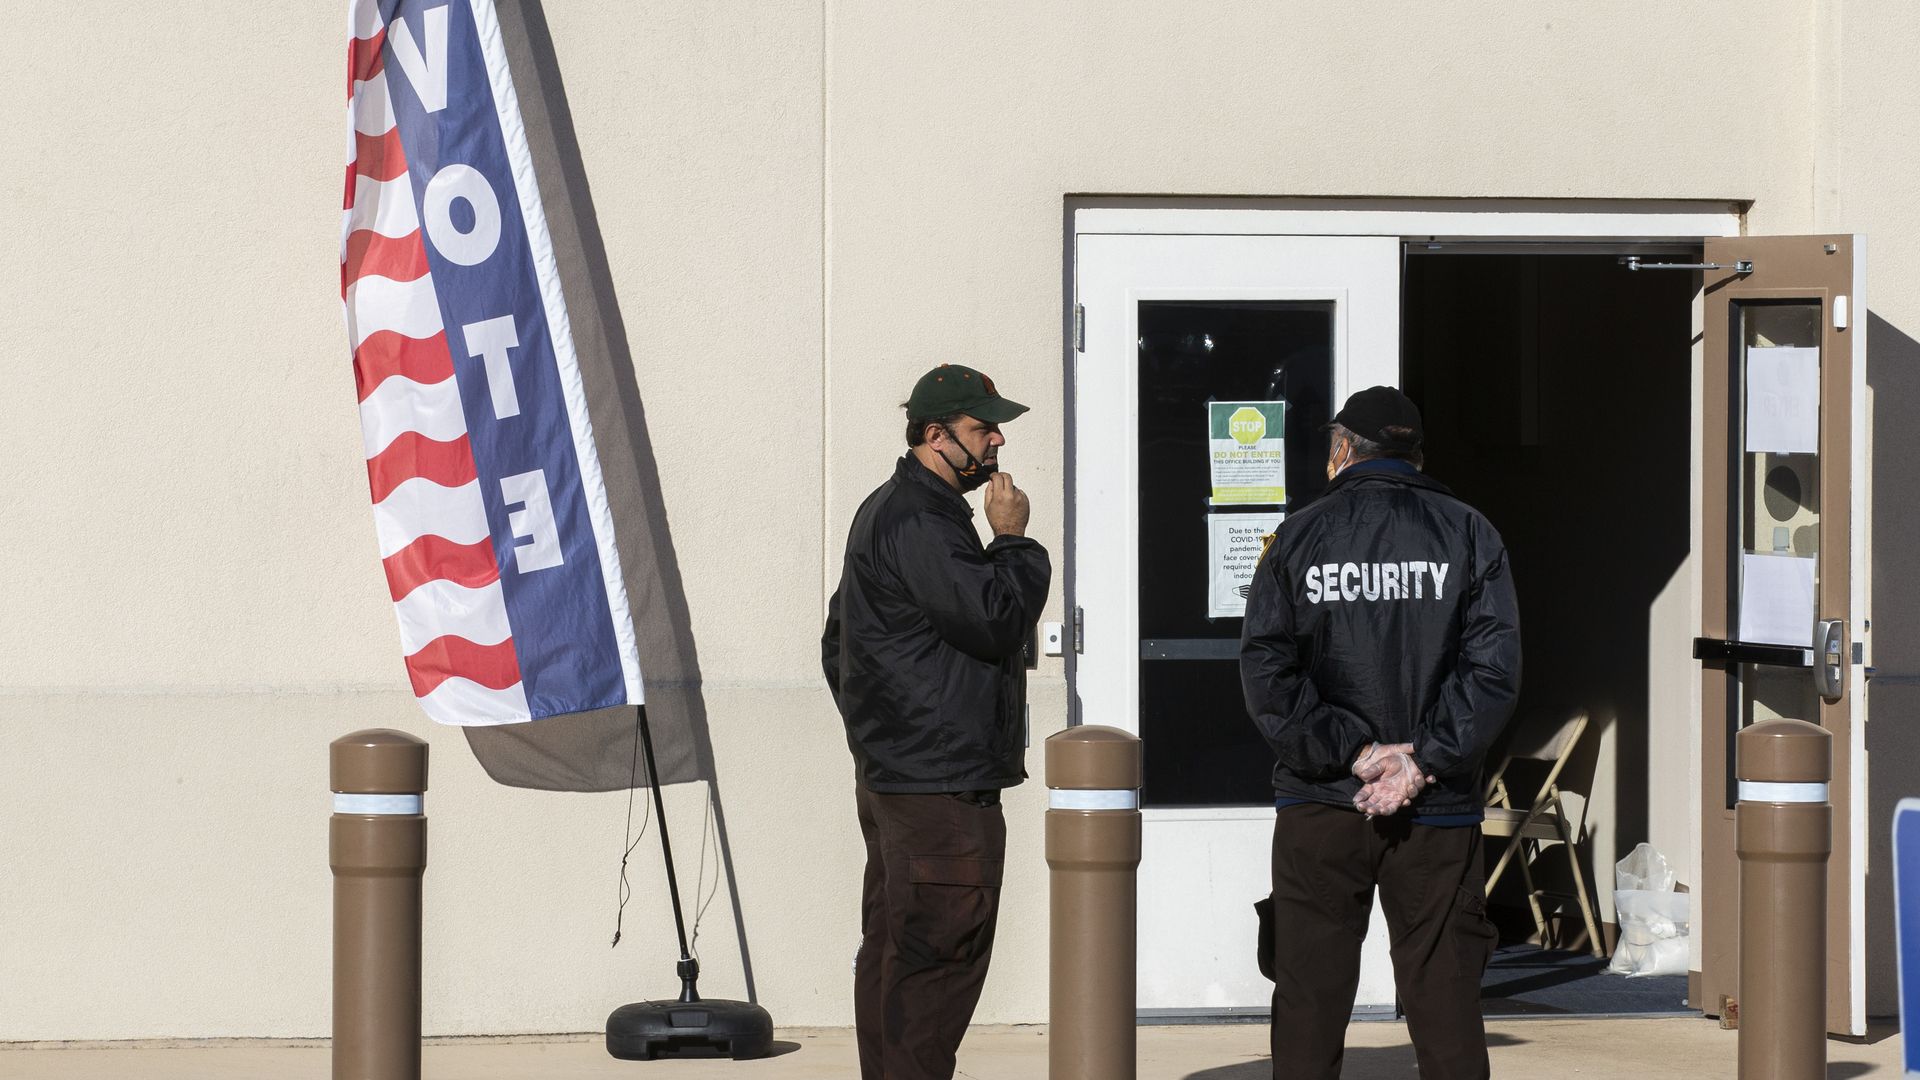  Hired security personnel wait for voters outside the Leon County Supervisor of Elections office on November 3, 2020